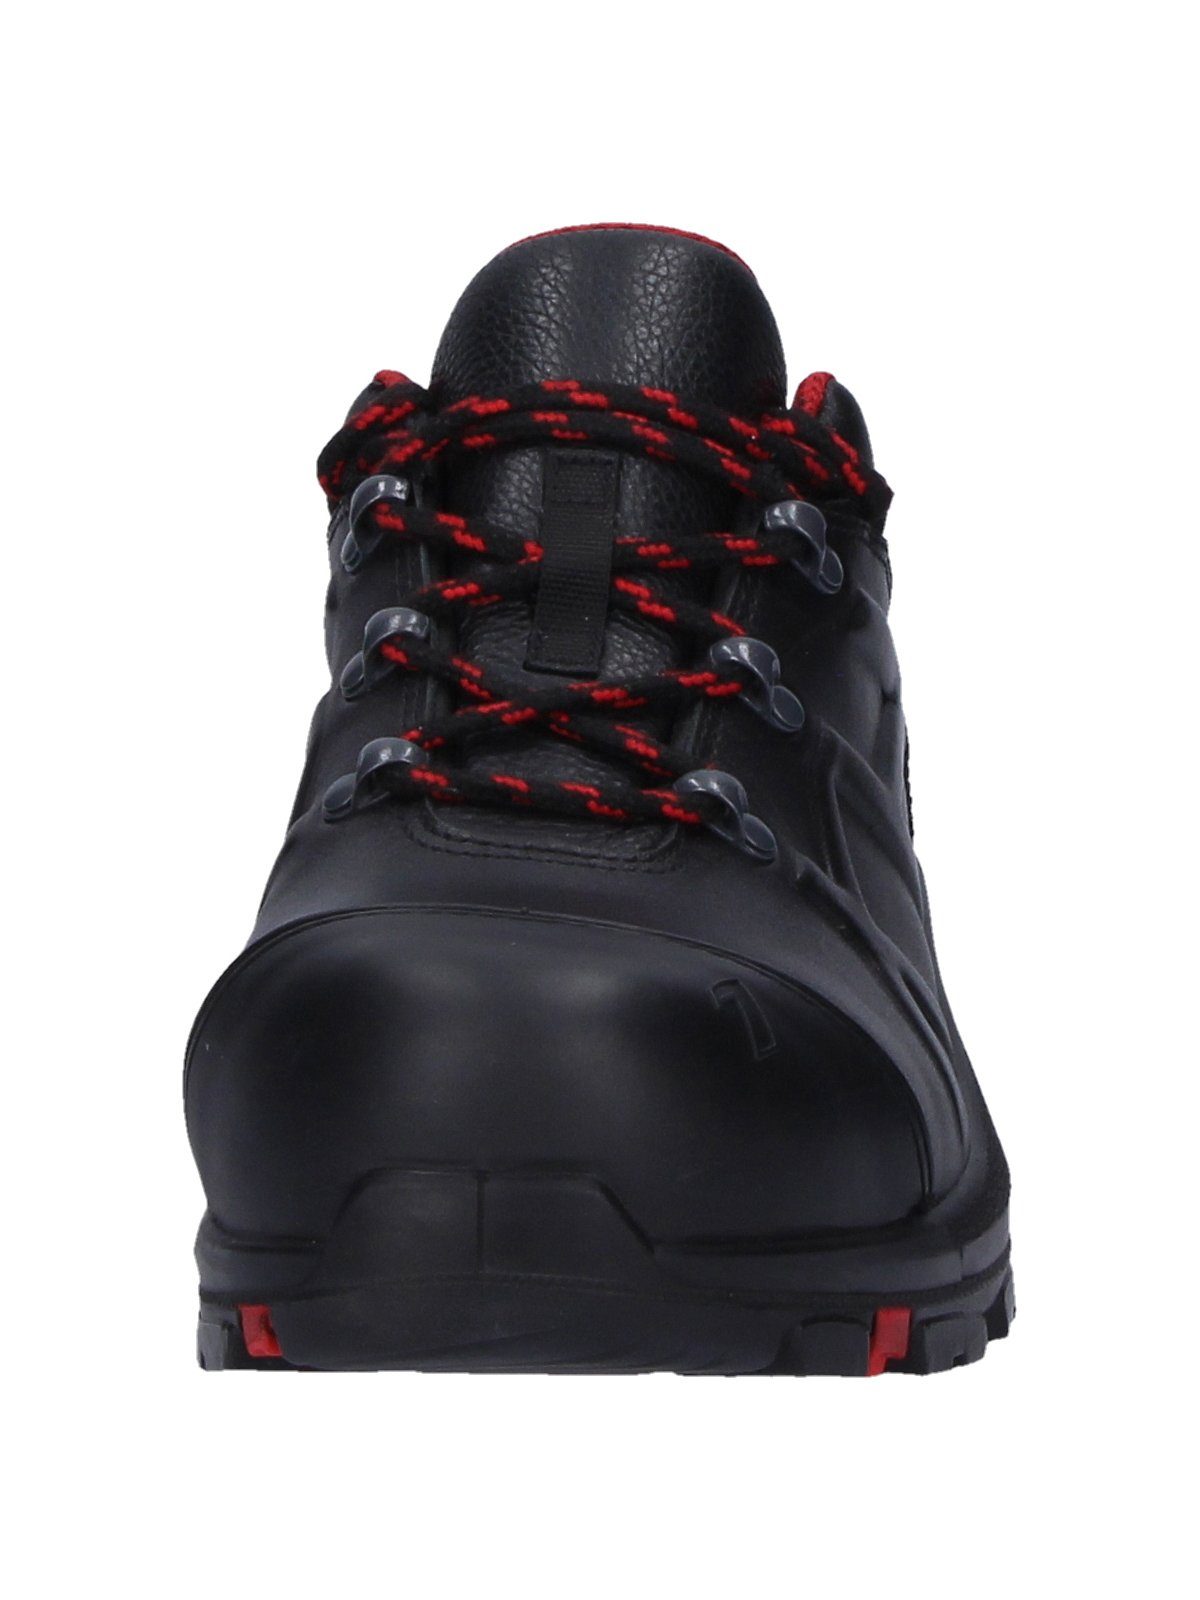 haix Black Eagle Safety 54 Arbeitsschuh black/red low